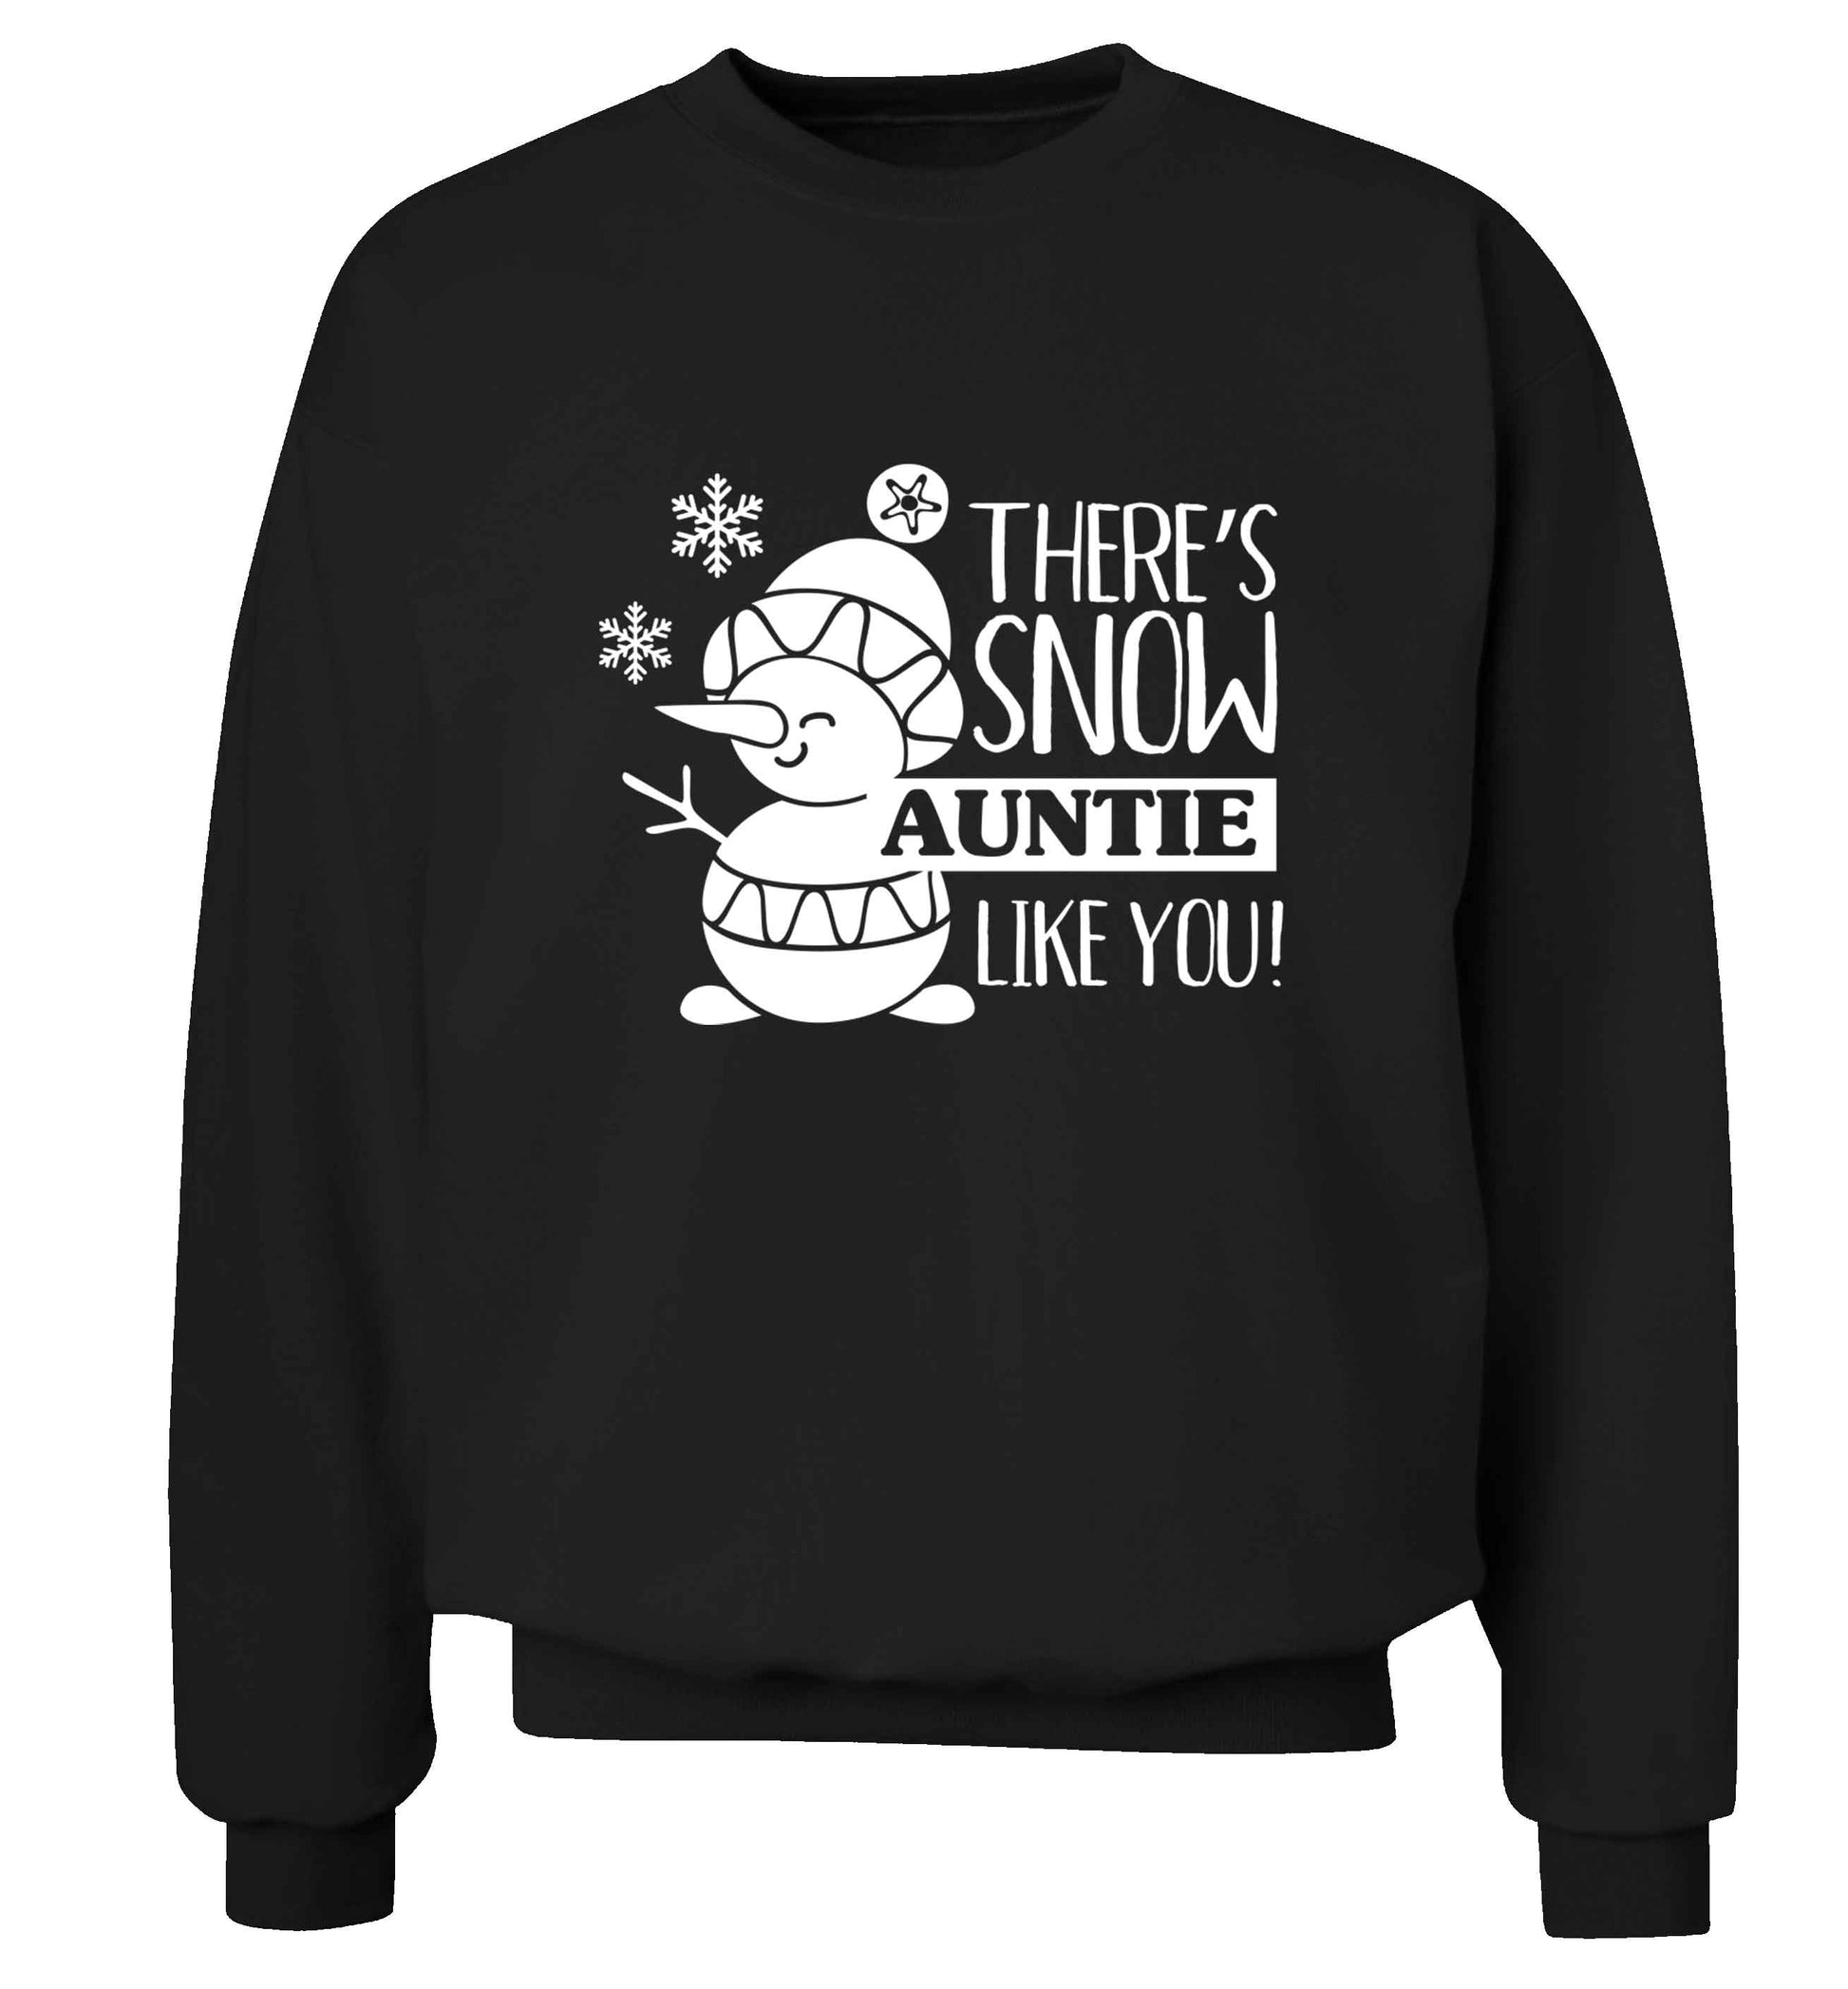 There's snow auntie like you adult's unisex black sweater 2XL